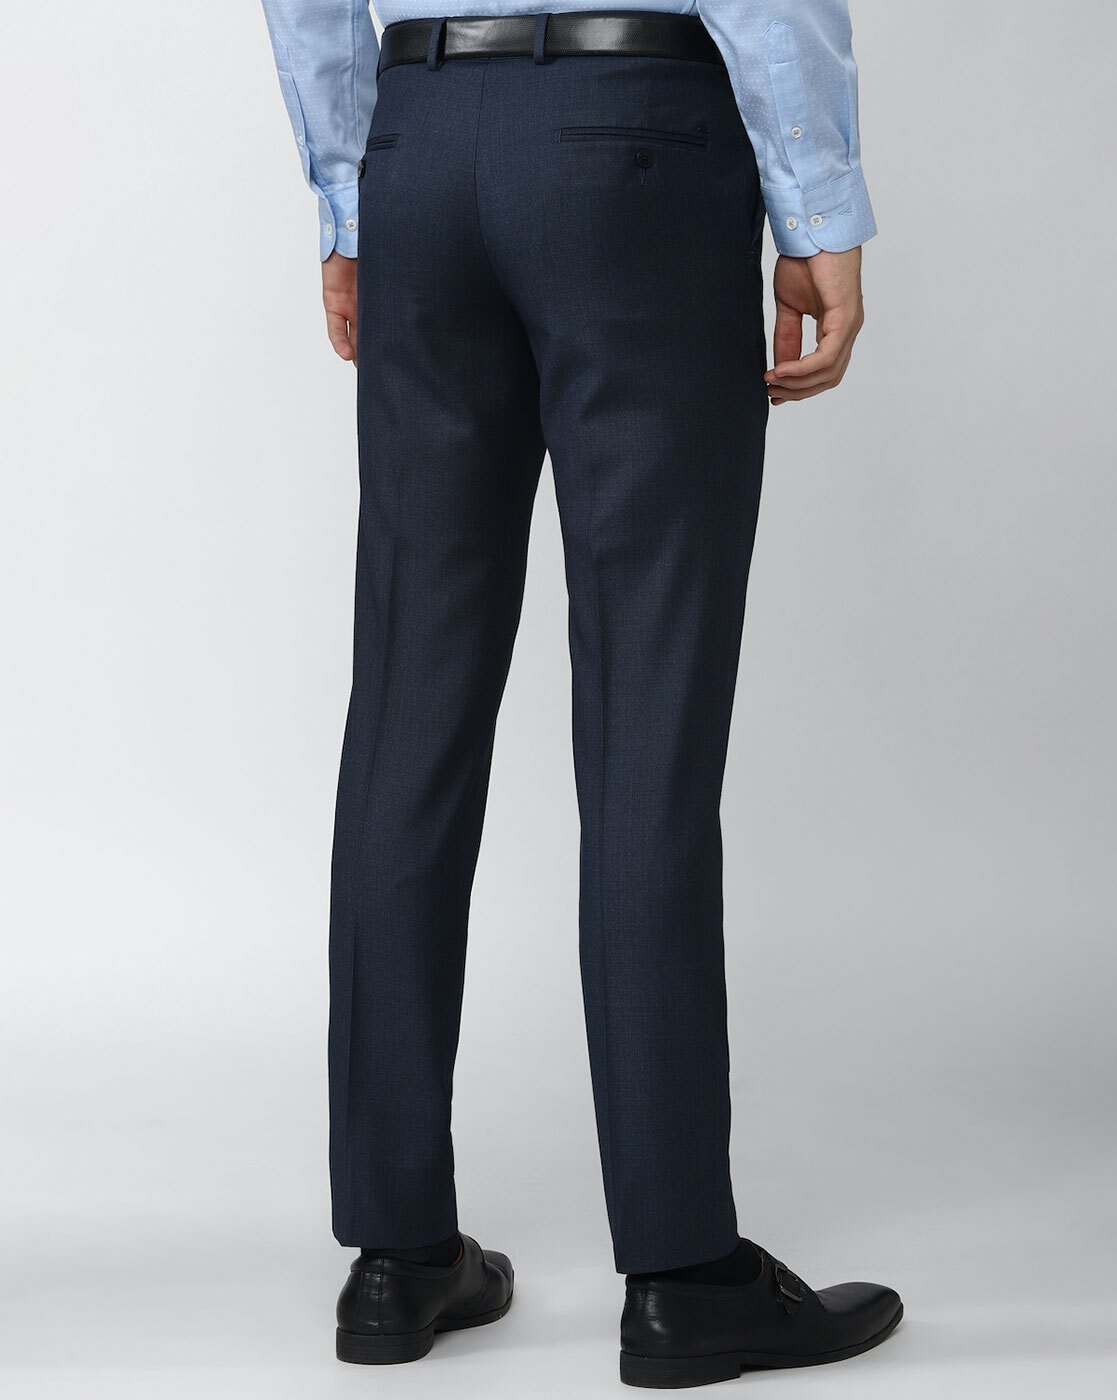 Textured Formal Trousers In Navy B95 Cairo